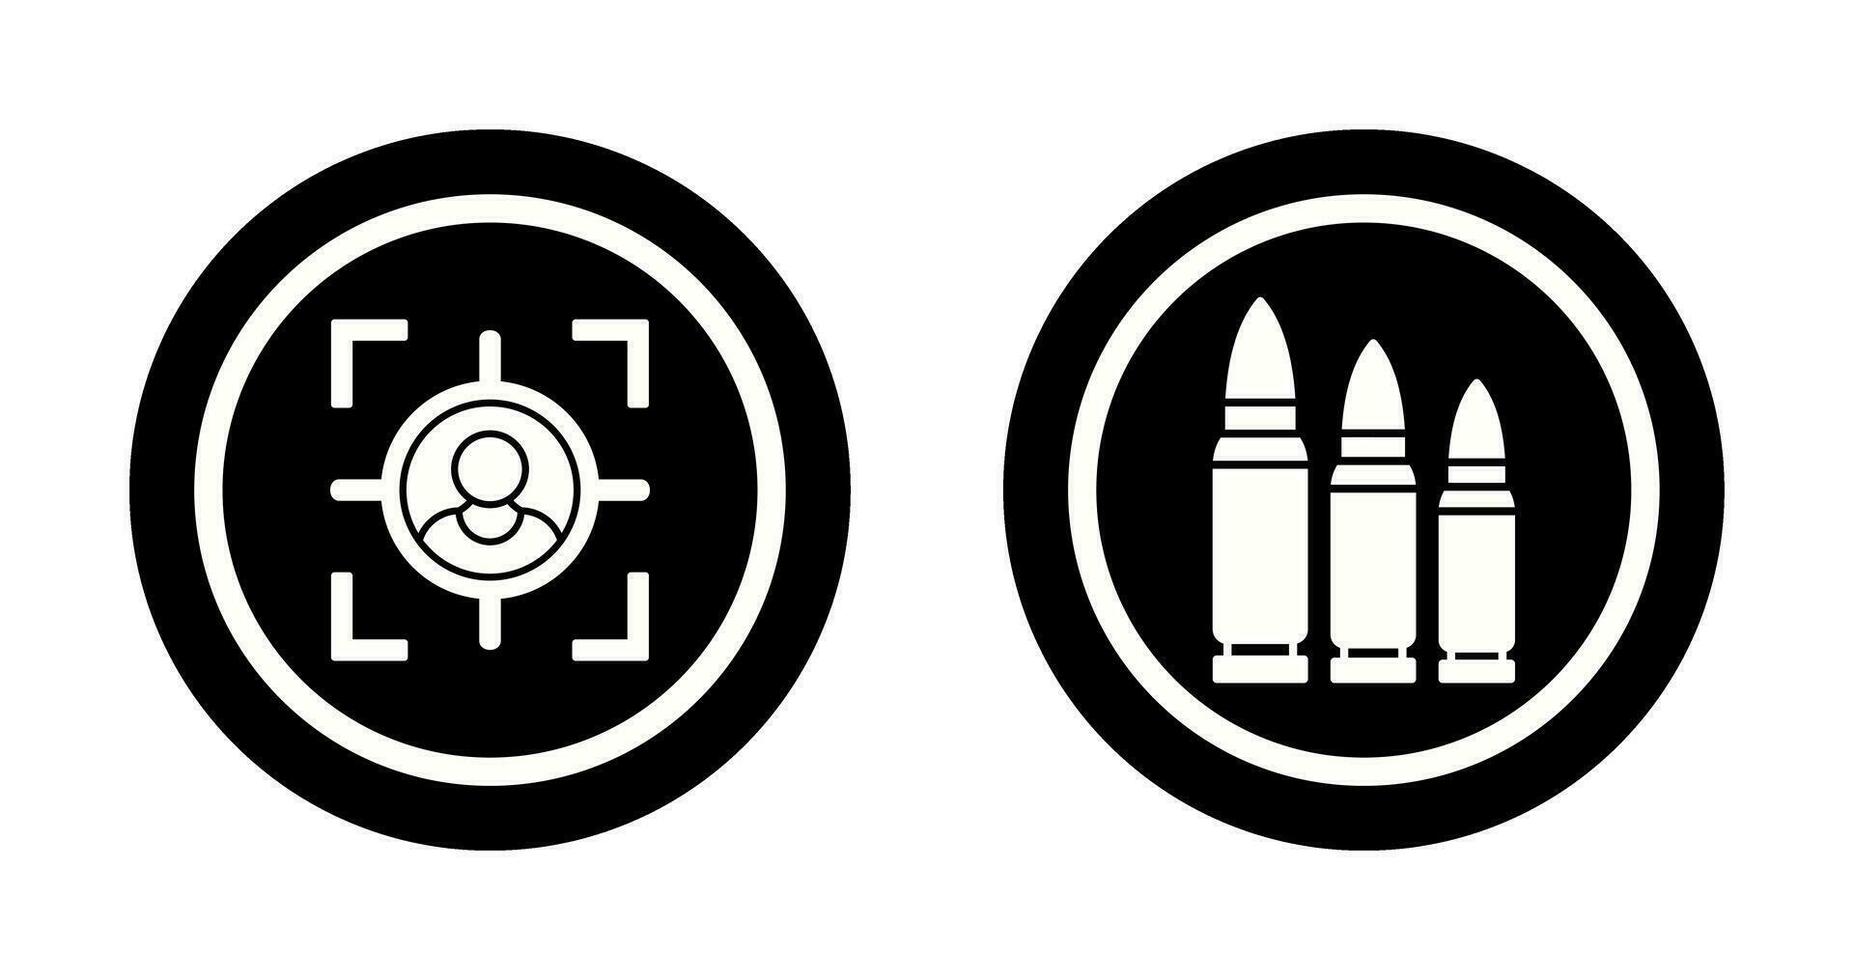 Target and Bullets Icon vector